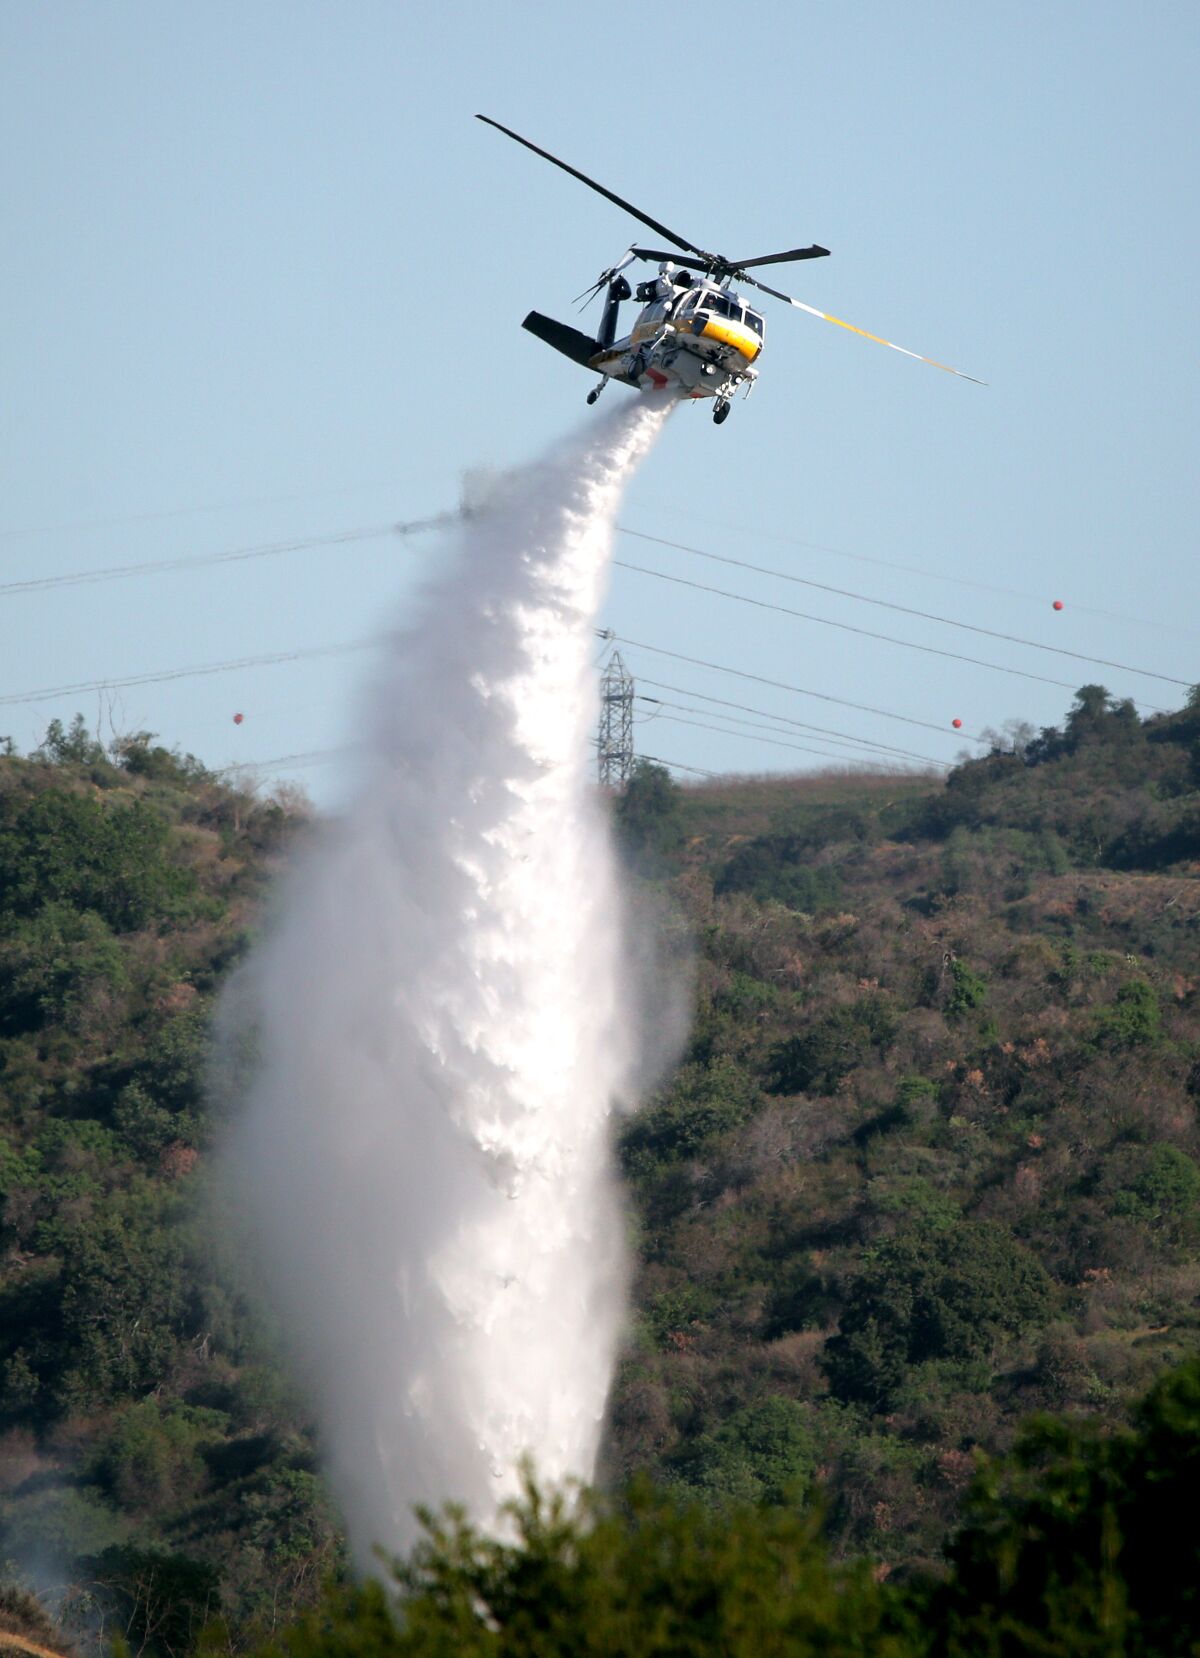 A helicopter drops water on brush.